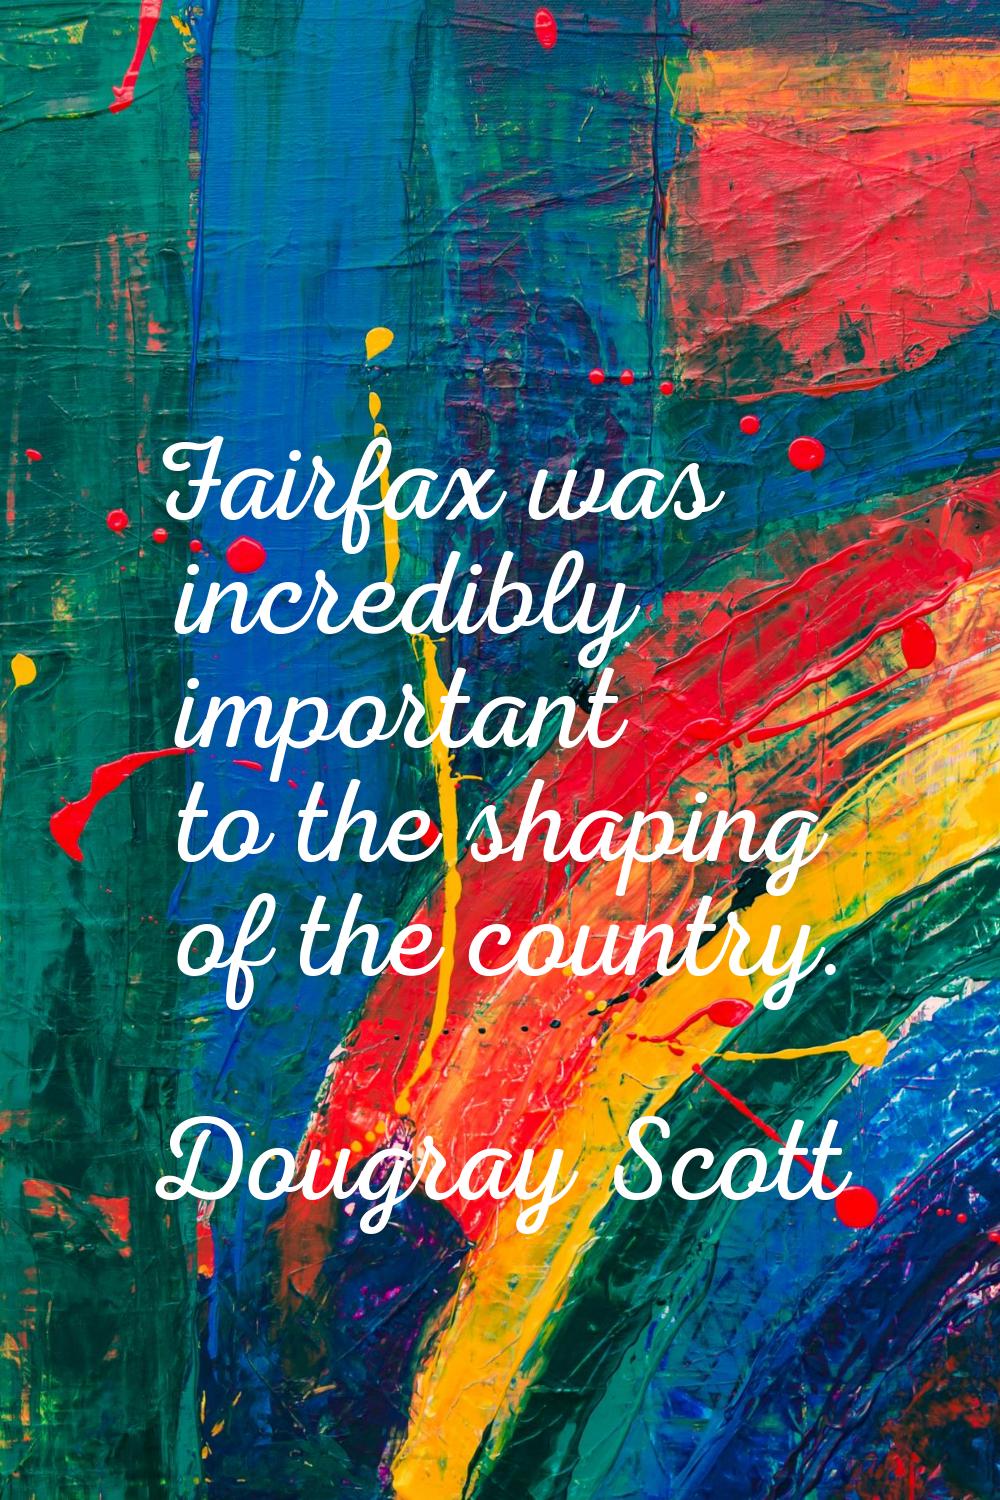 Fairfax was incredibly important to the shaping of the country.